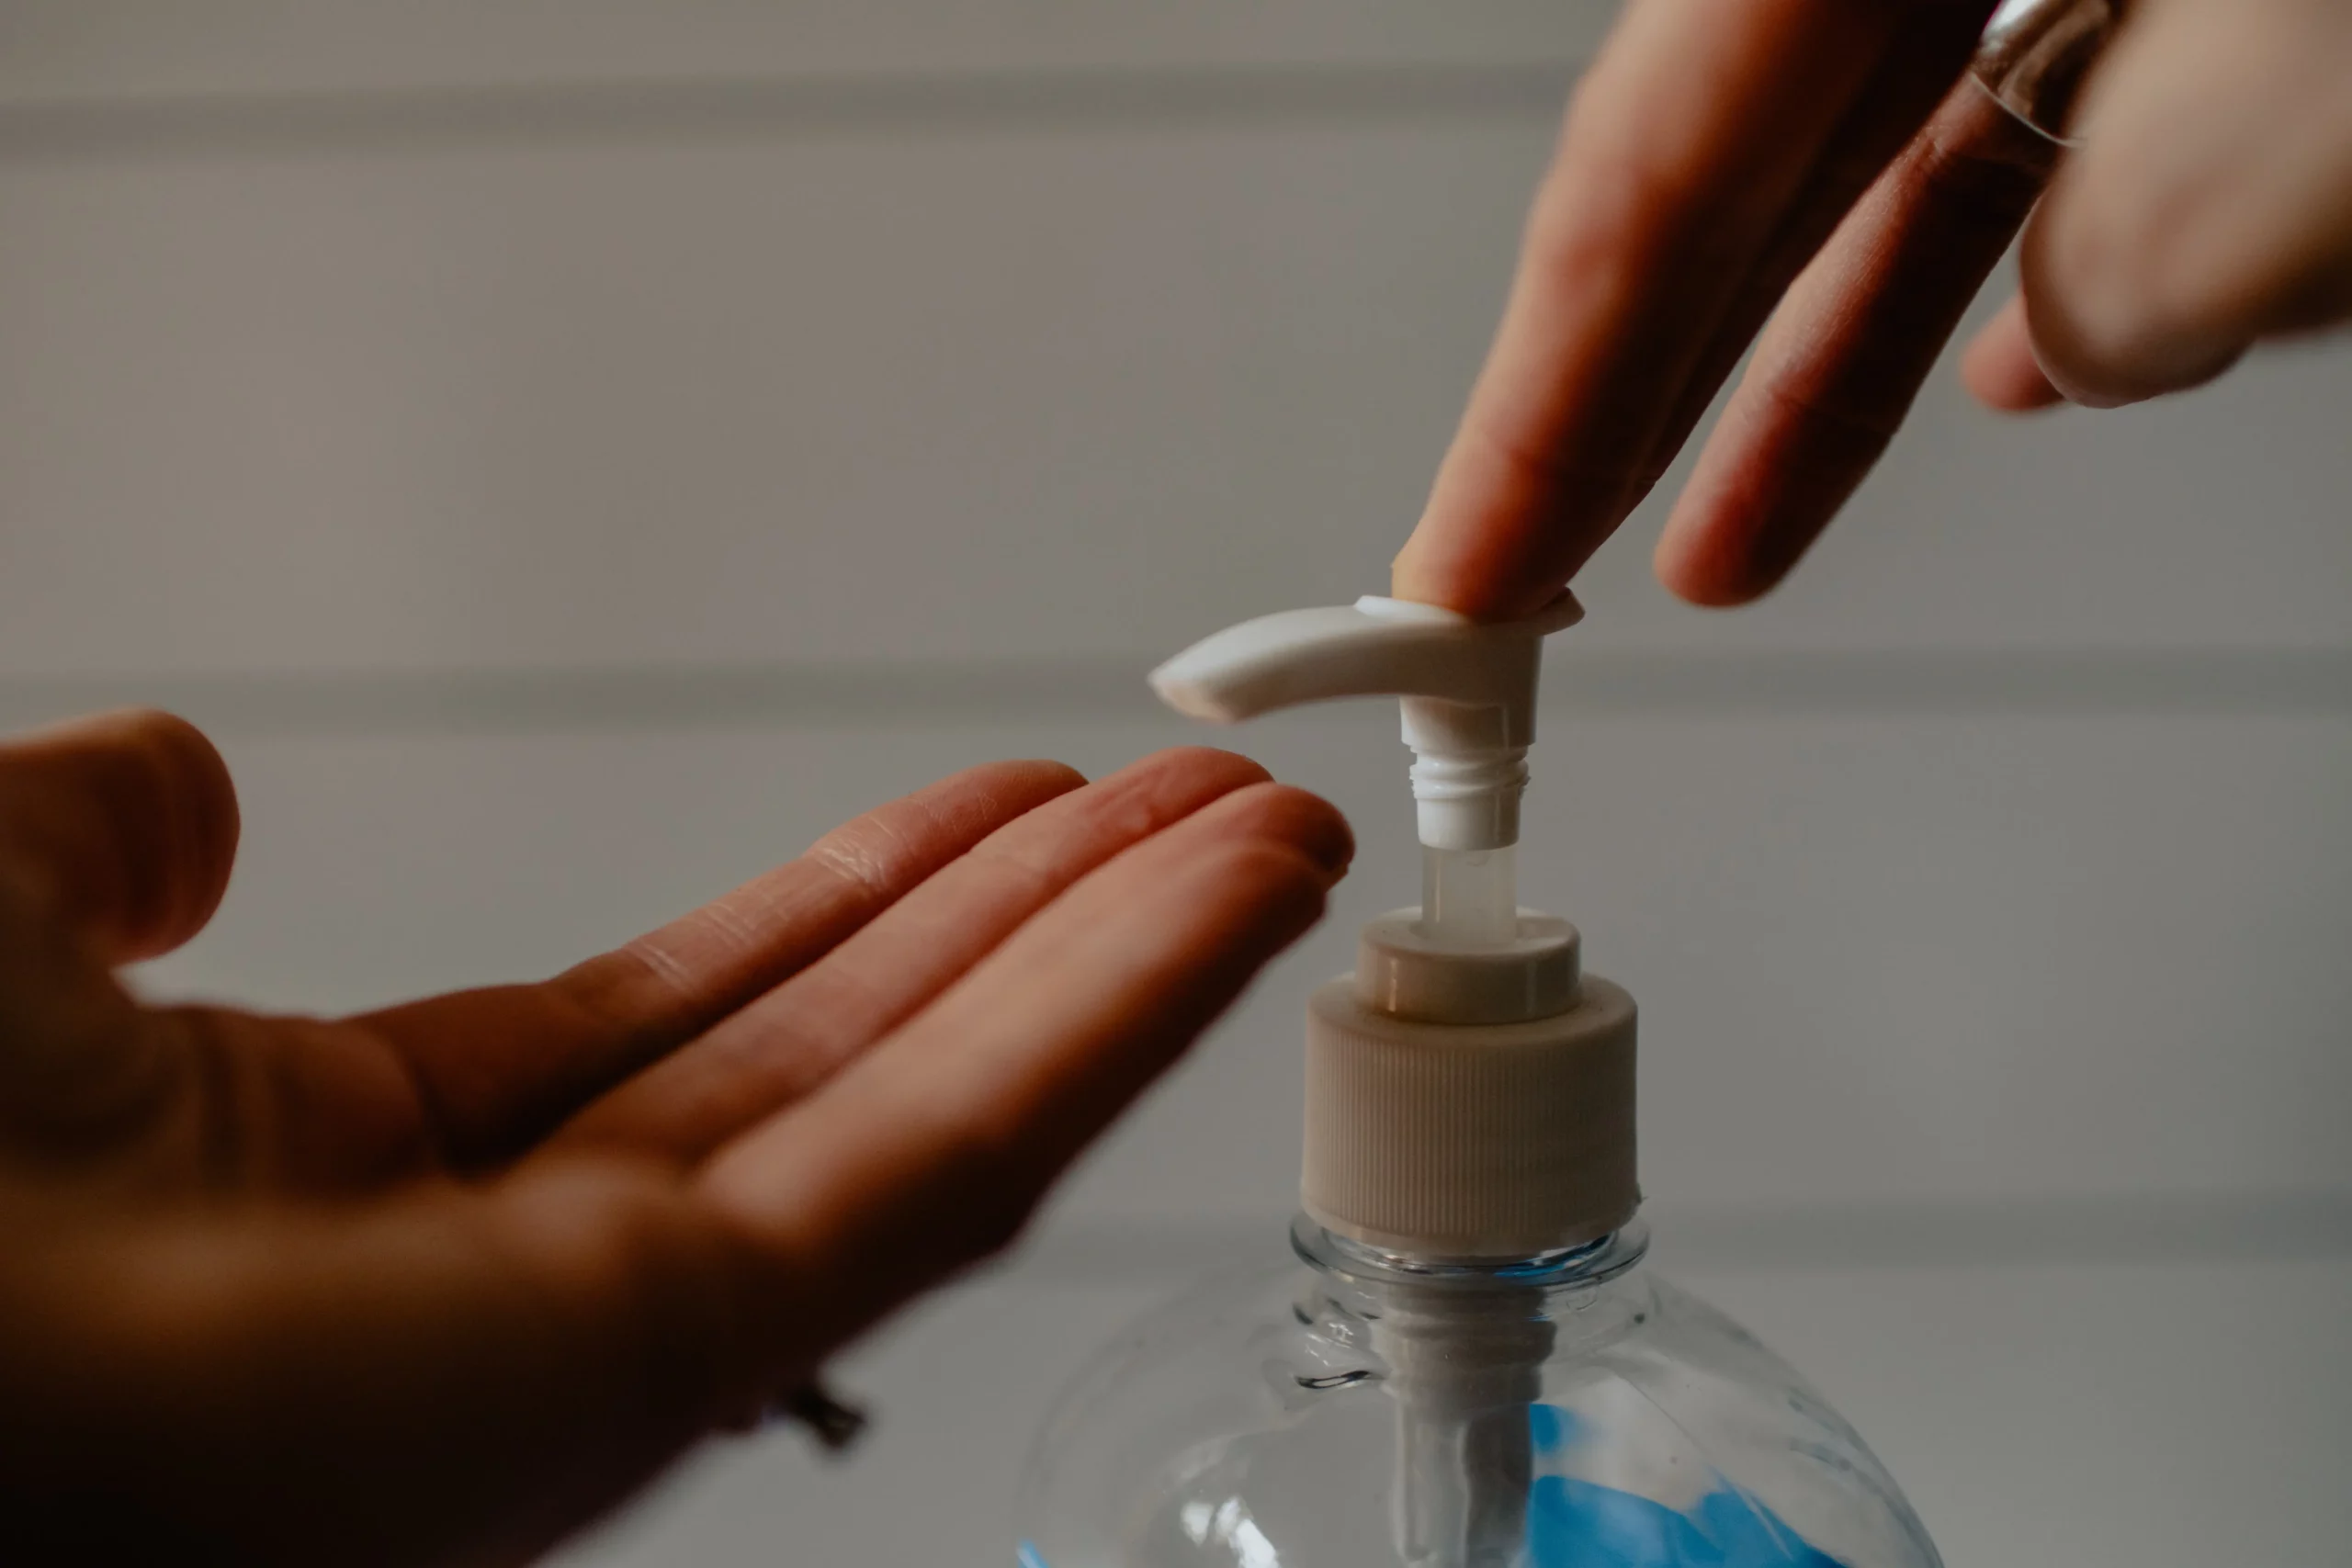 an image of a hand pressing the hand sanitiser